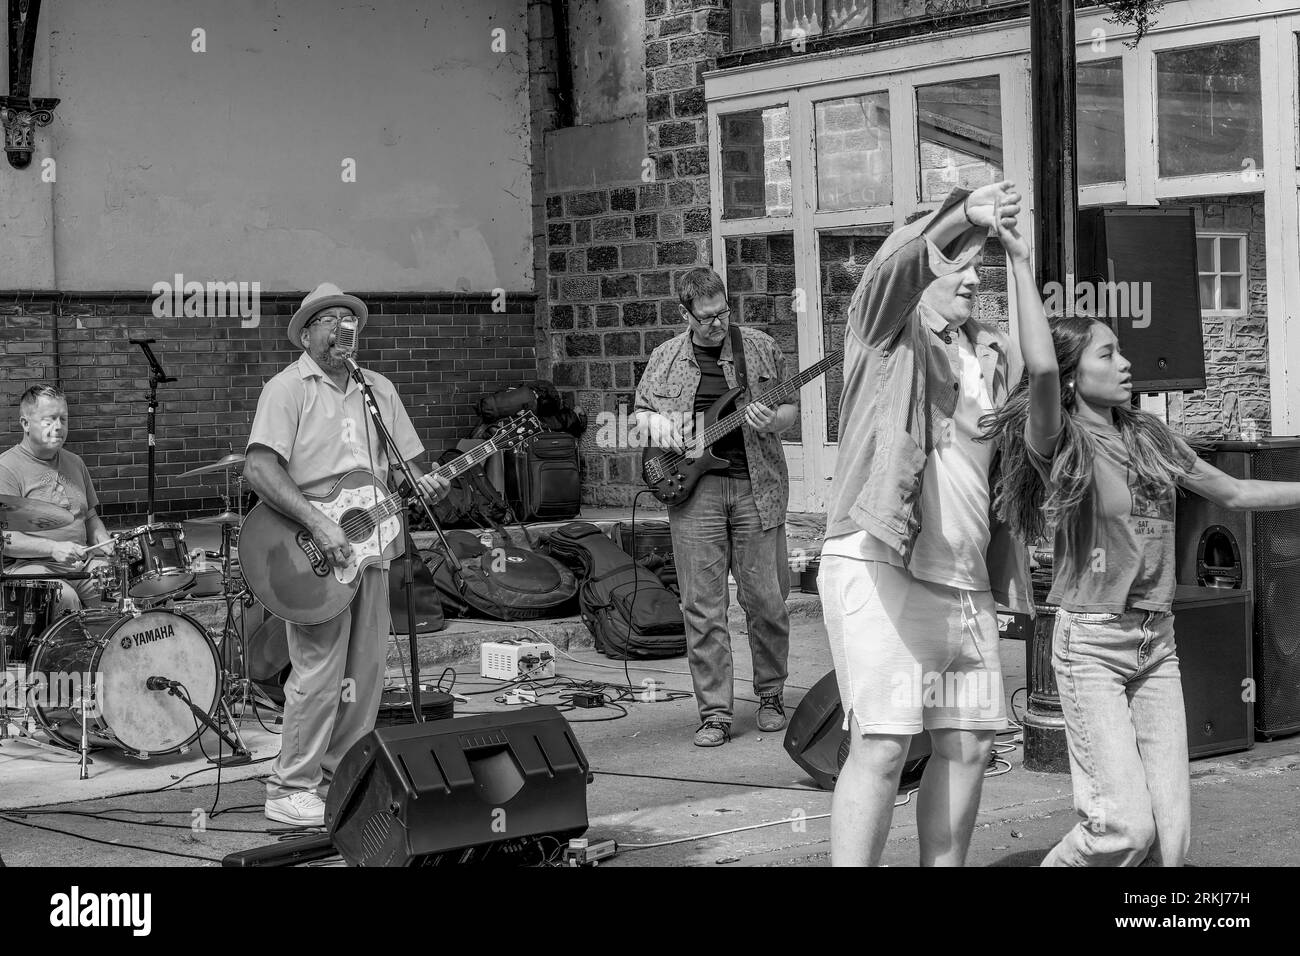 A couple dances in front of a band, which consists of a lead singer/guitarist, bass player, and drummer, in Crescent Gardens, Harrogate, UK. Stock Photo